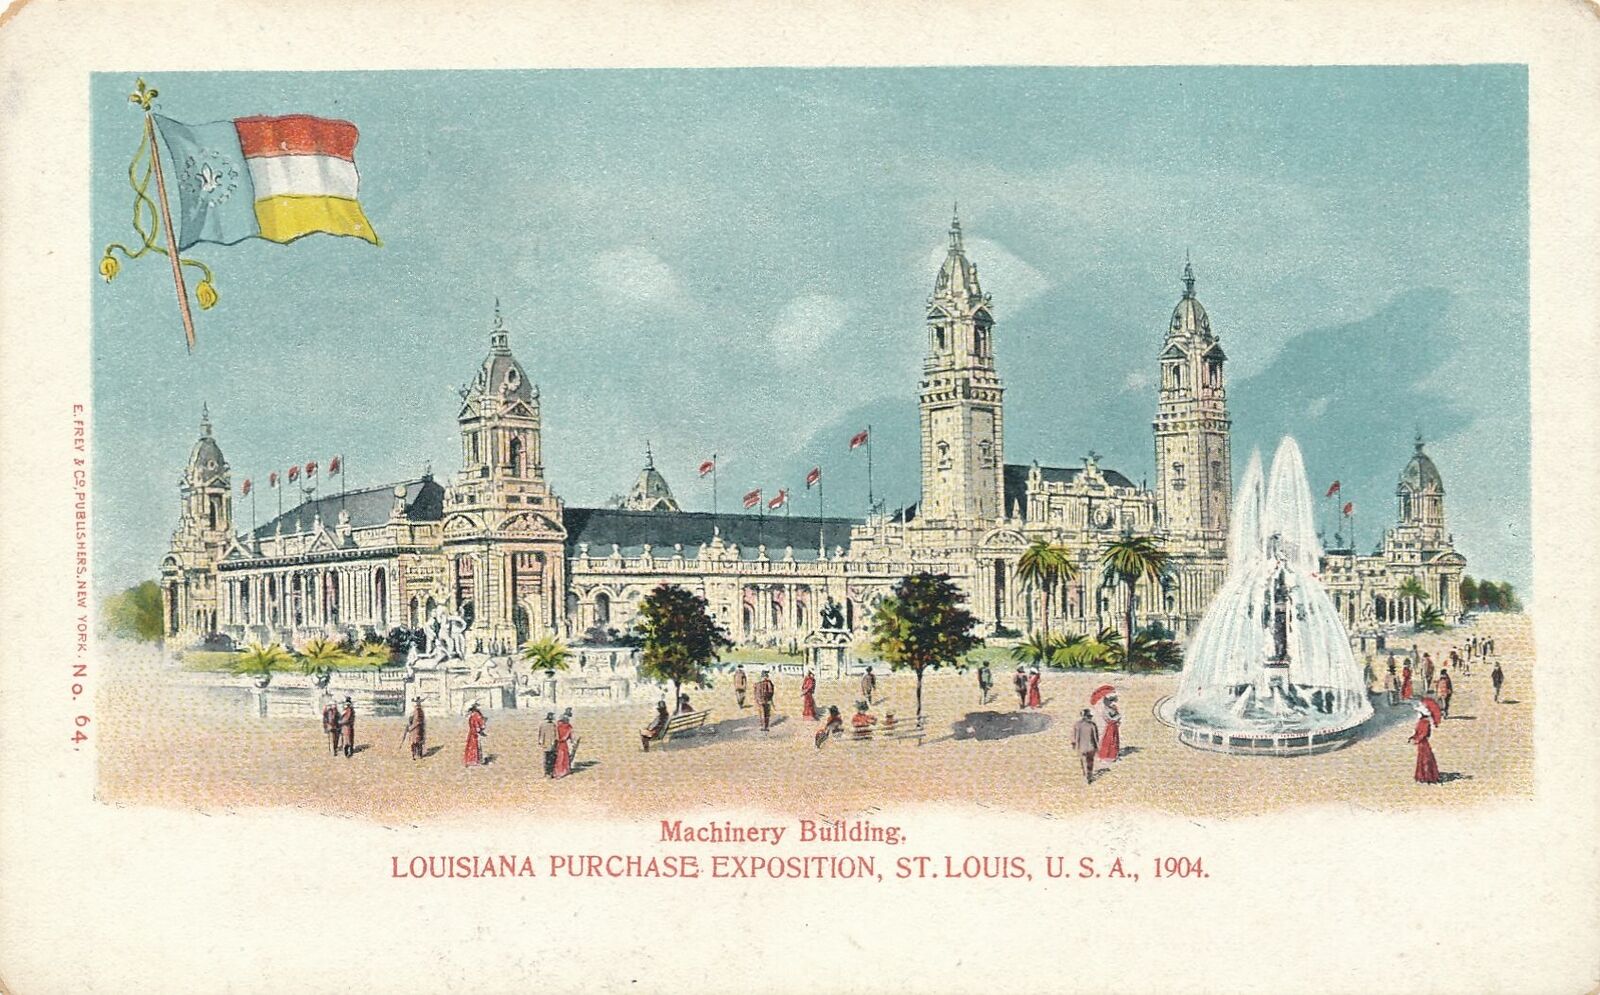 1904 Louisiana Purchase Exposition Machinery Building - udb